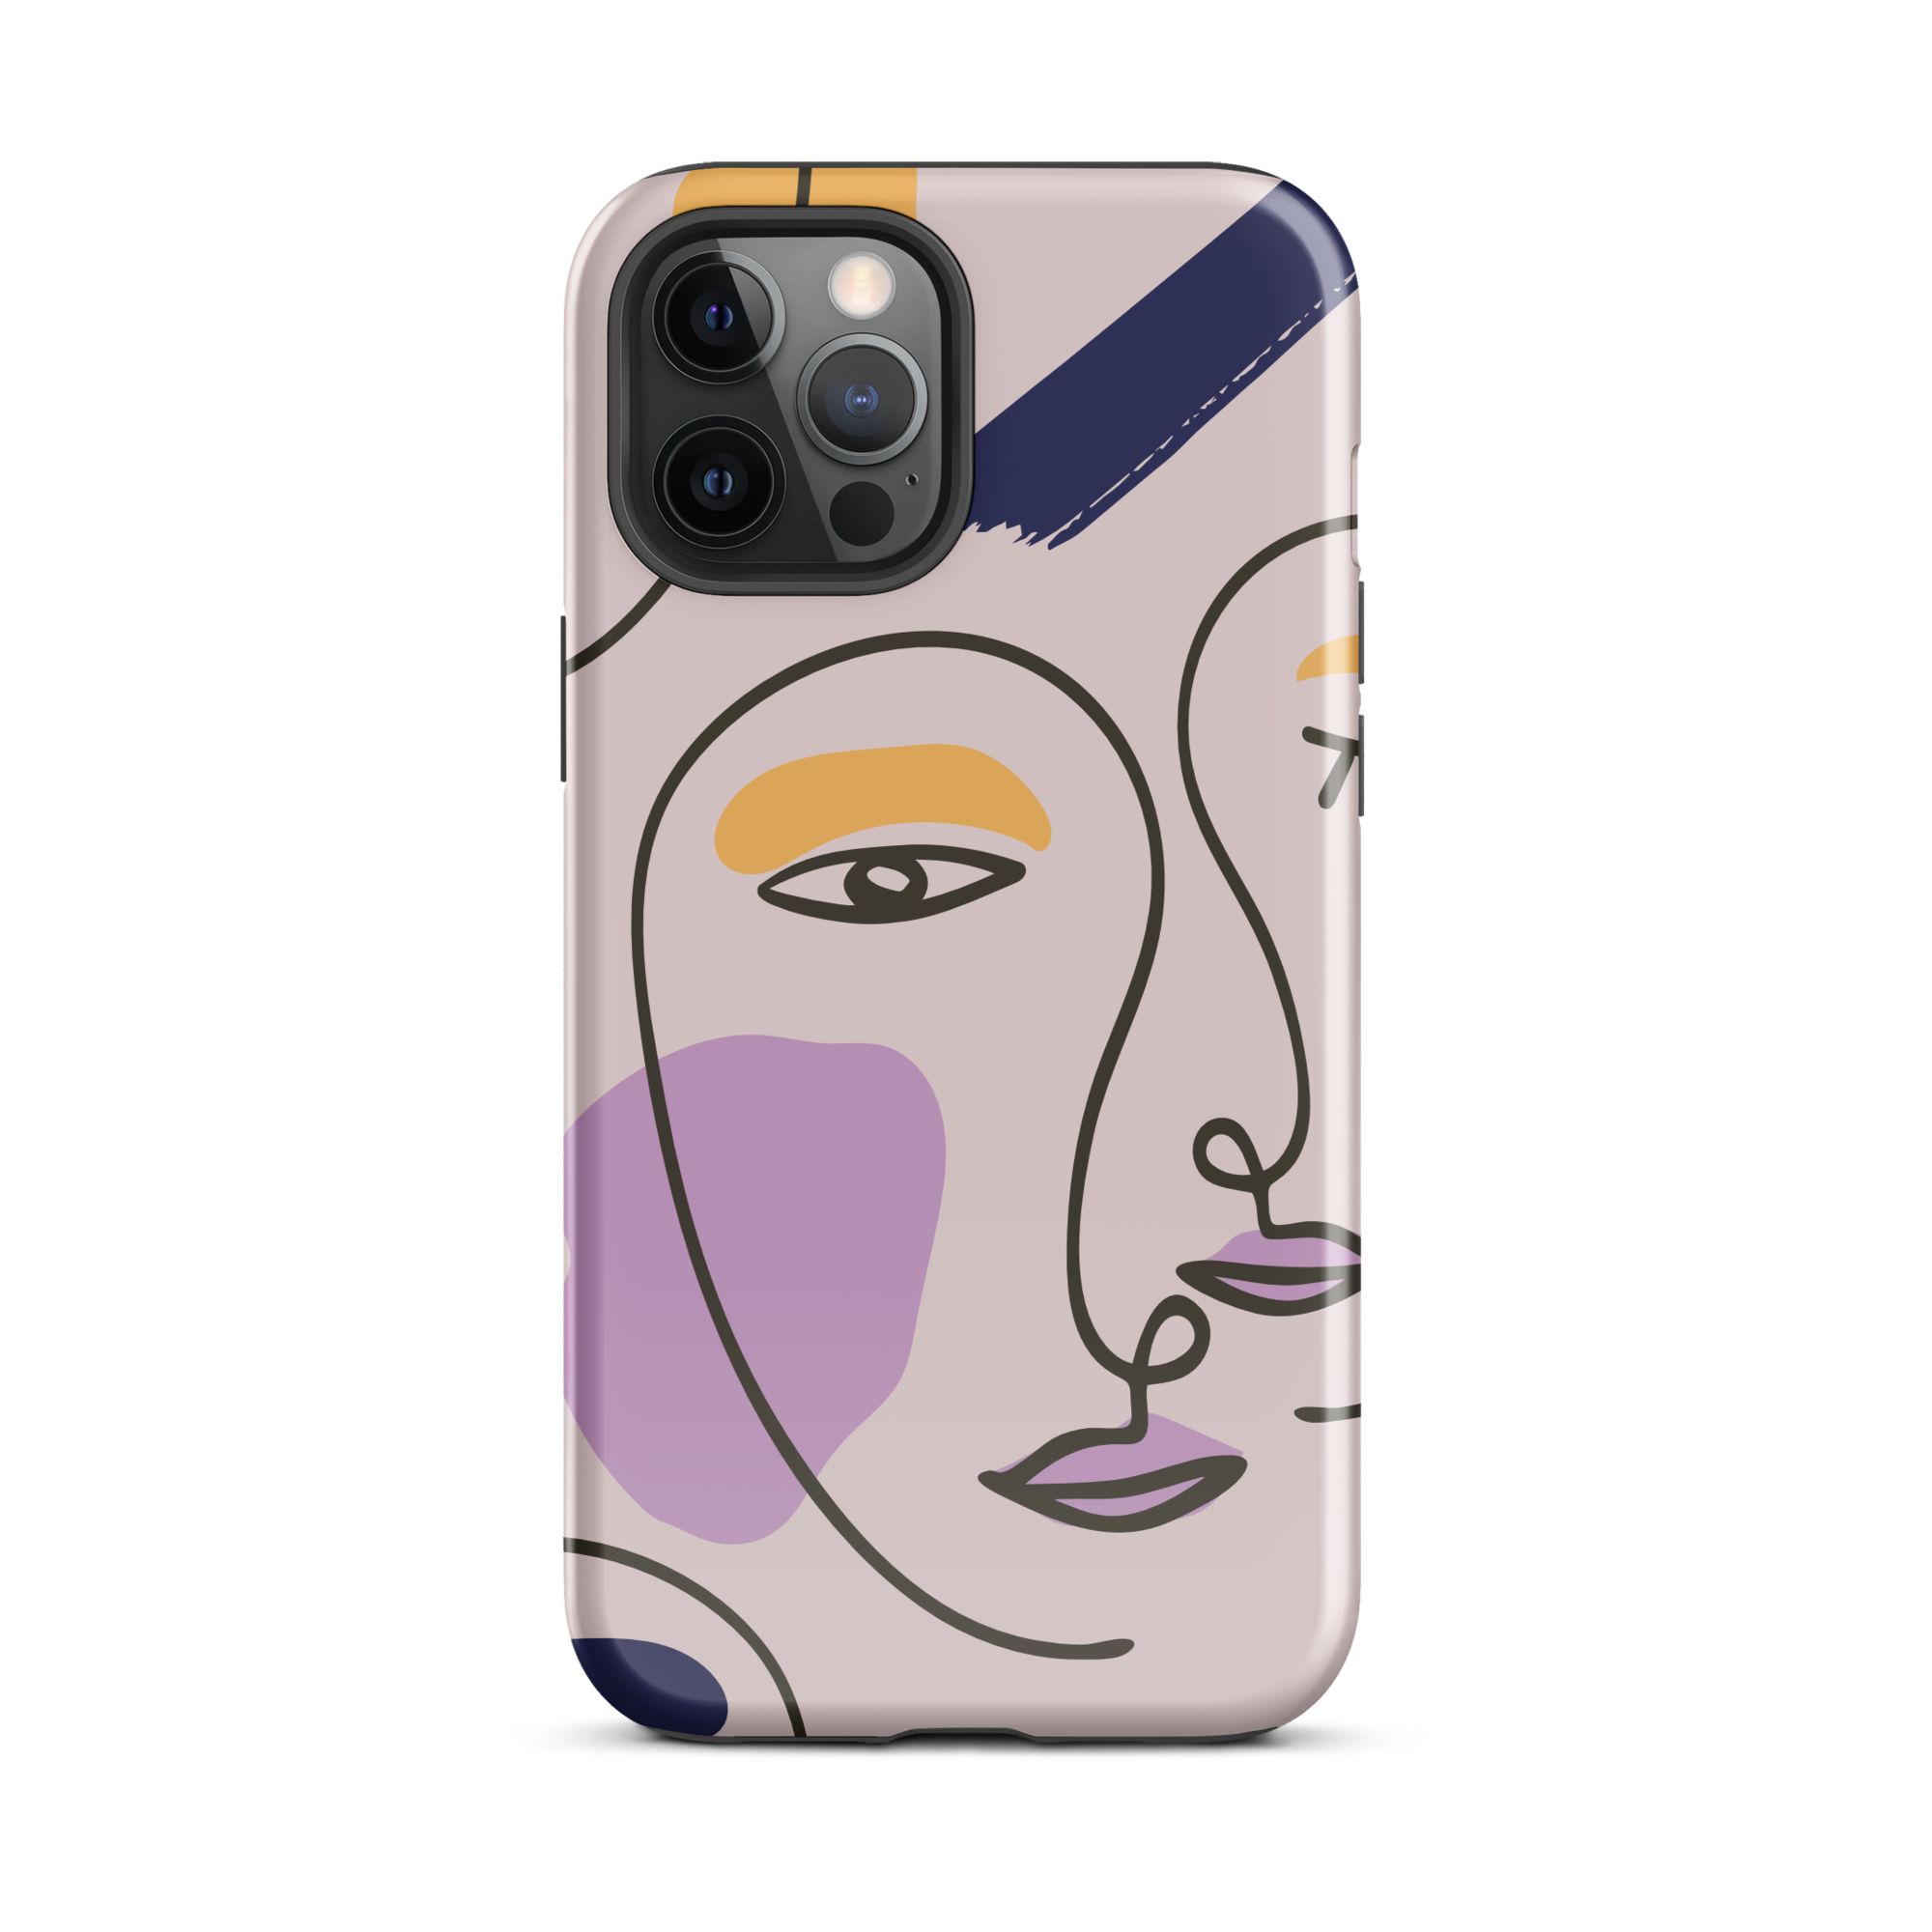 Muse iPhone 12 Pro Max Case